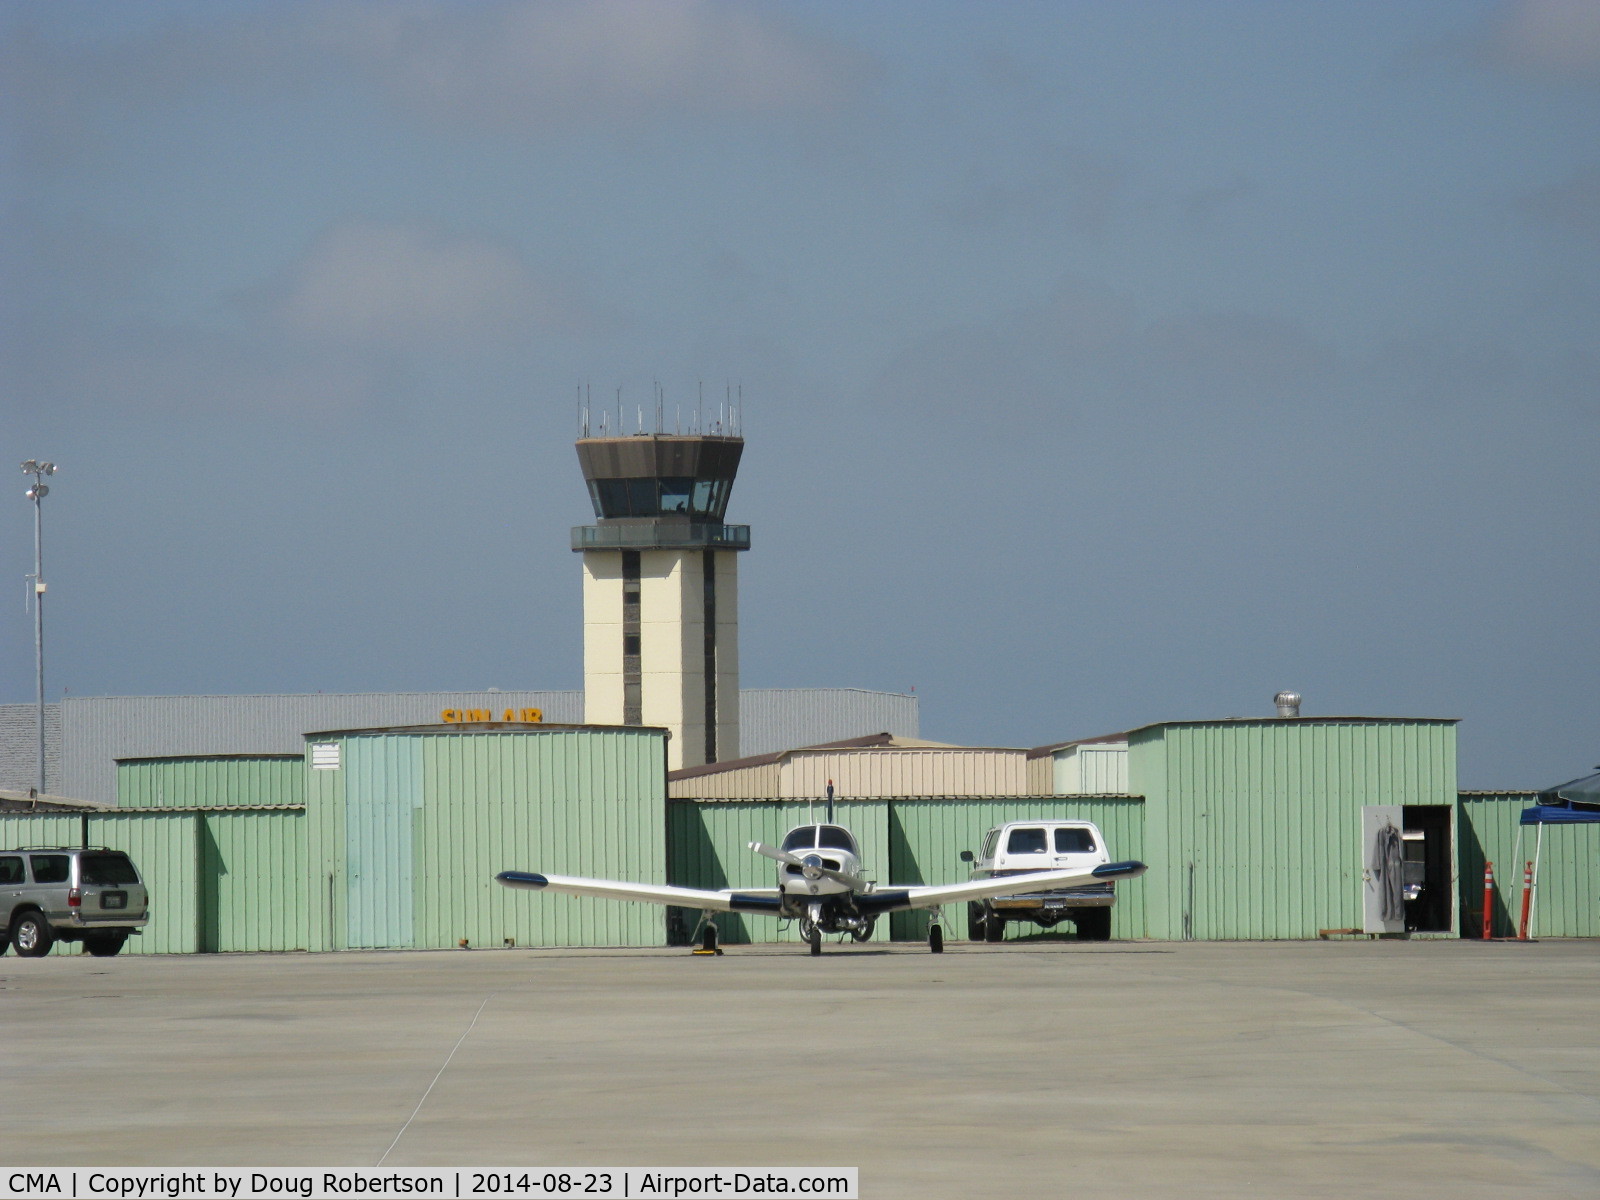 Camarillo Airport (CMA) - CMA Air Traffic Control Tower, located central to displaced runway 8/26, on airport shot